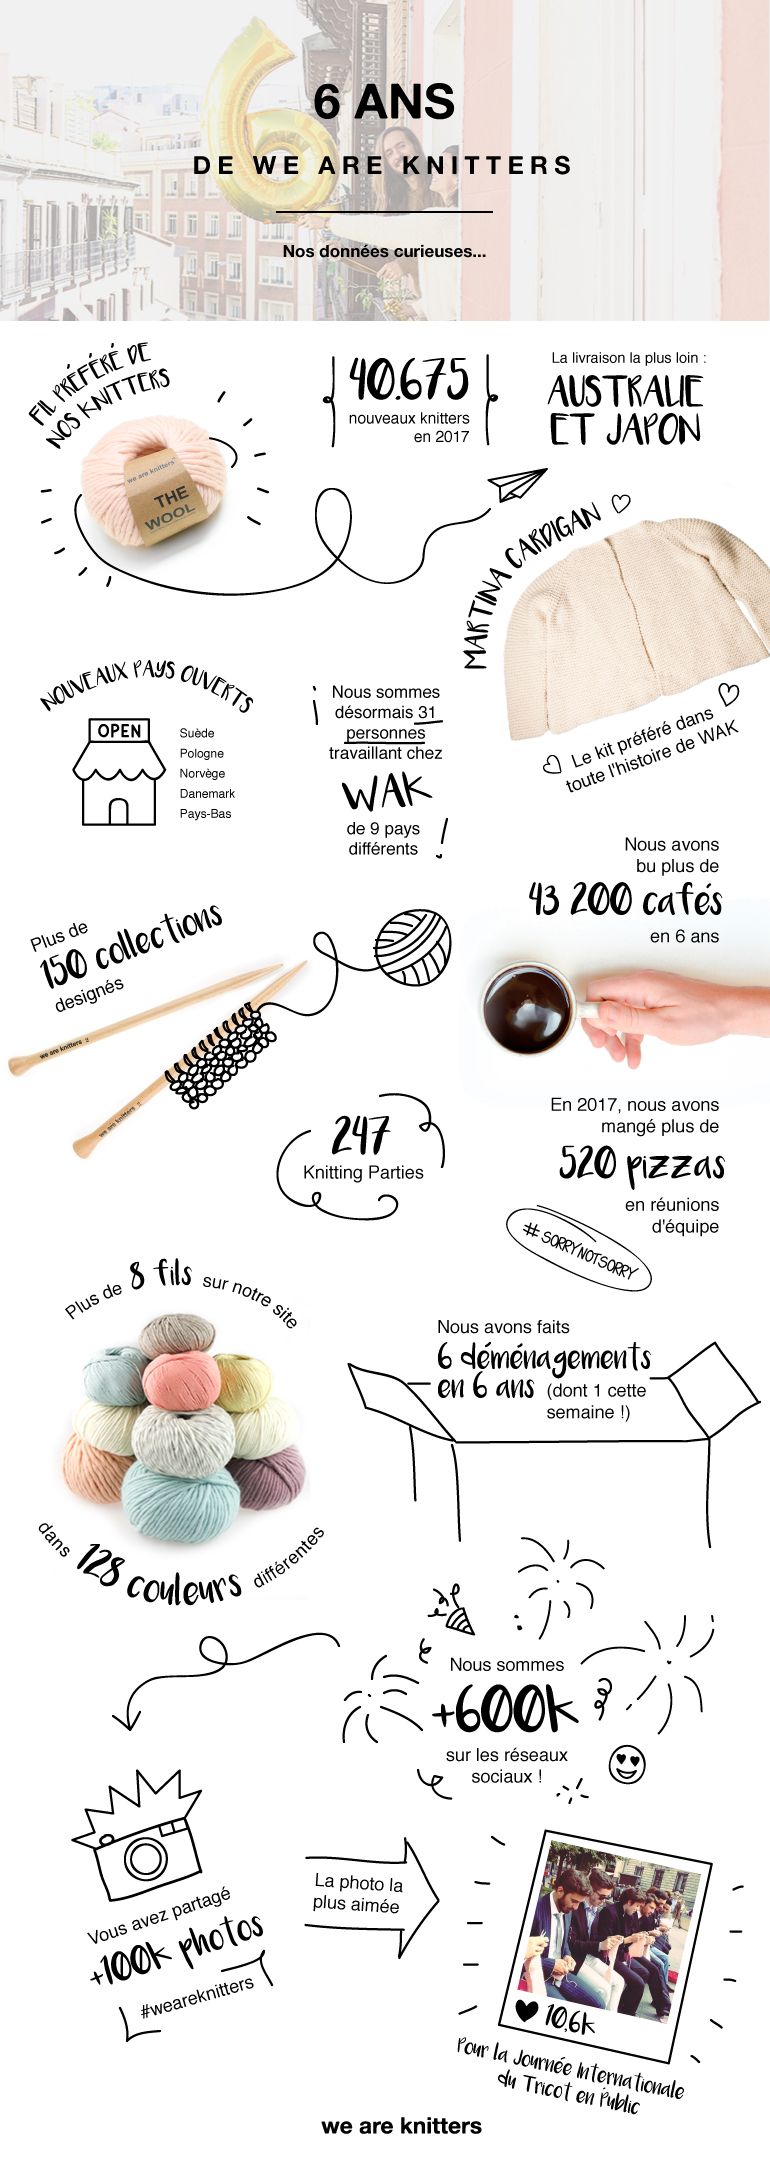 We Are Knitters 6ème anniversaire | The Blog - FR